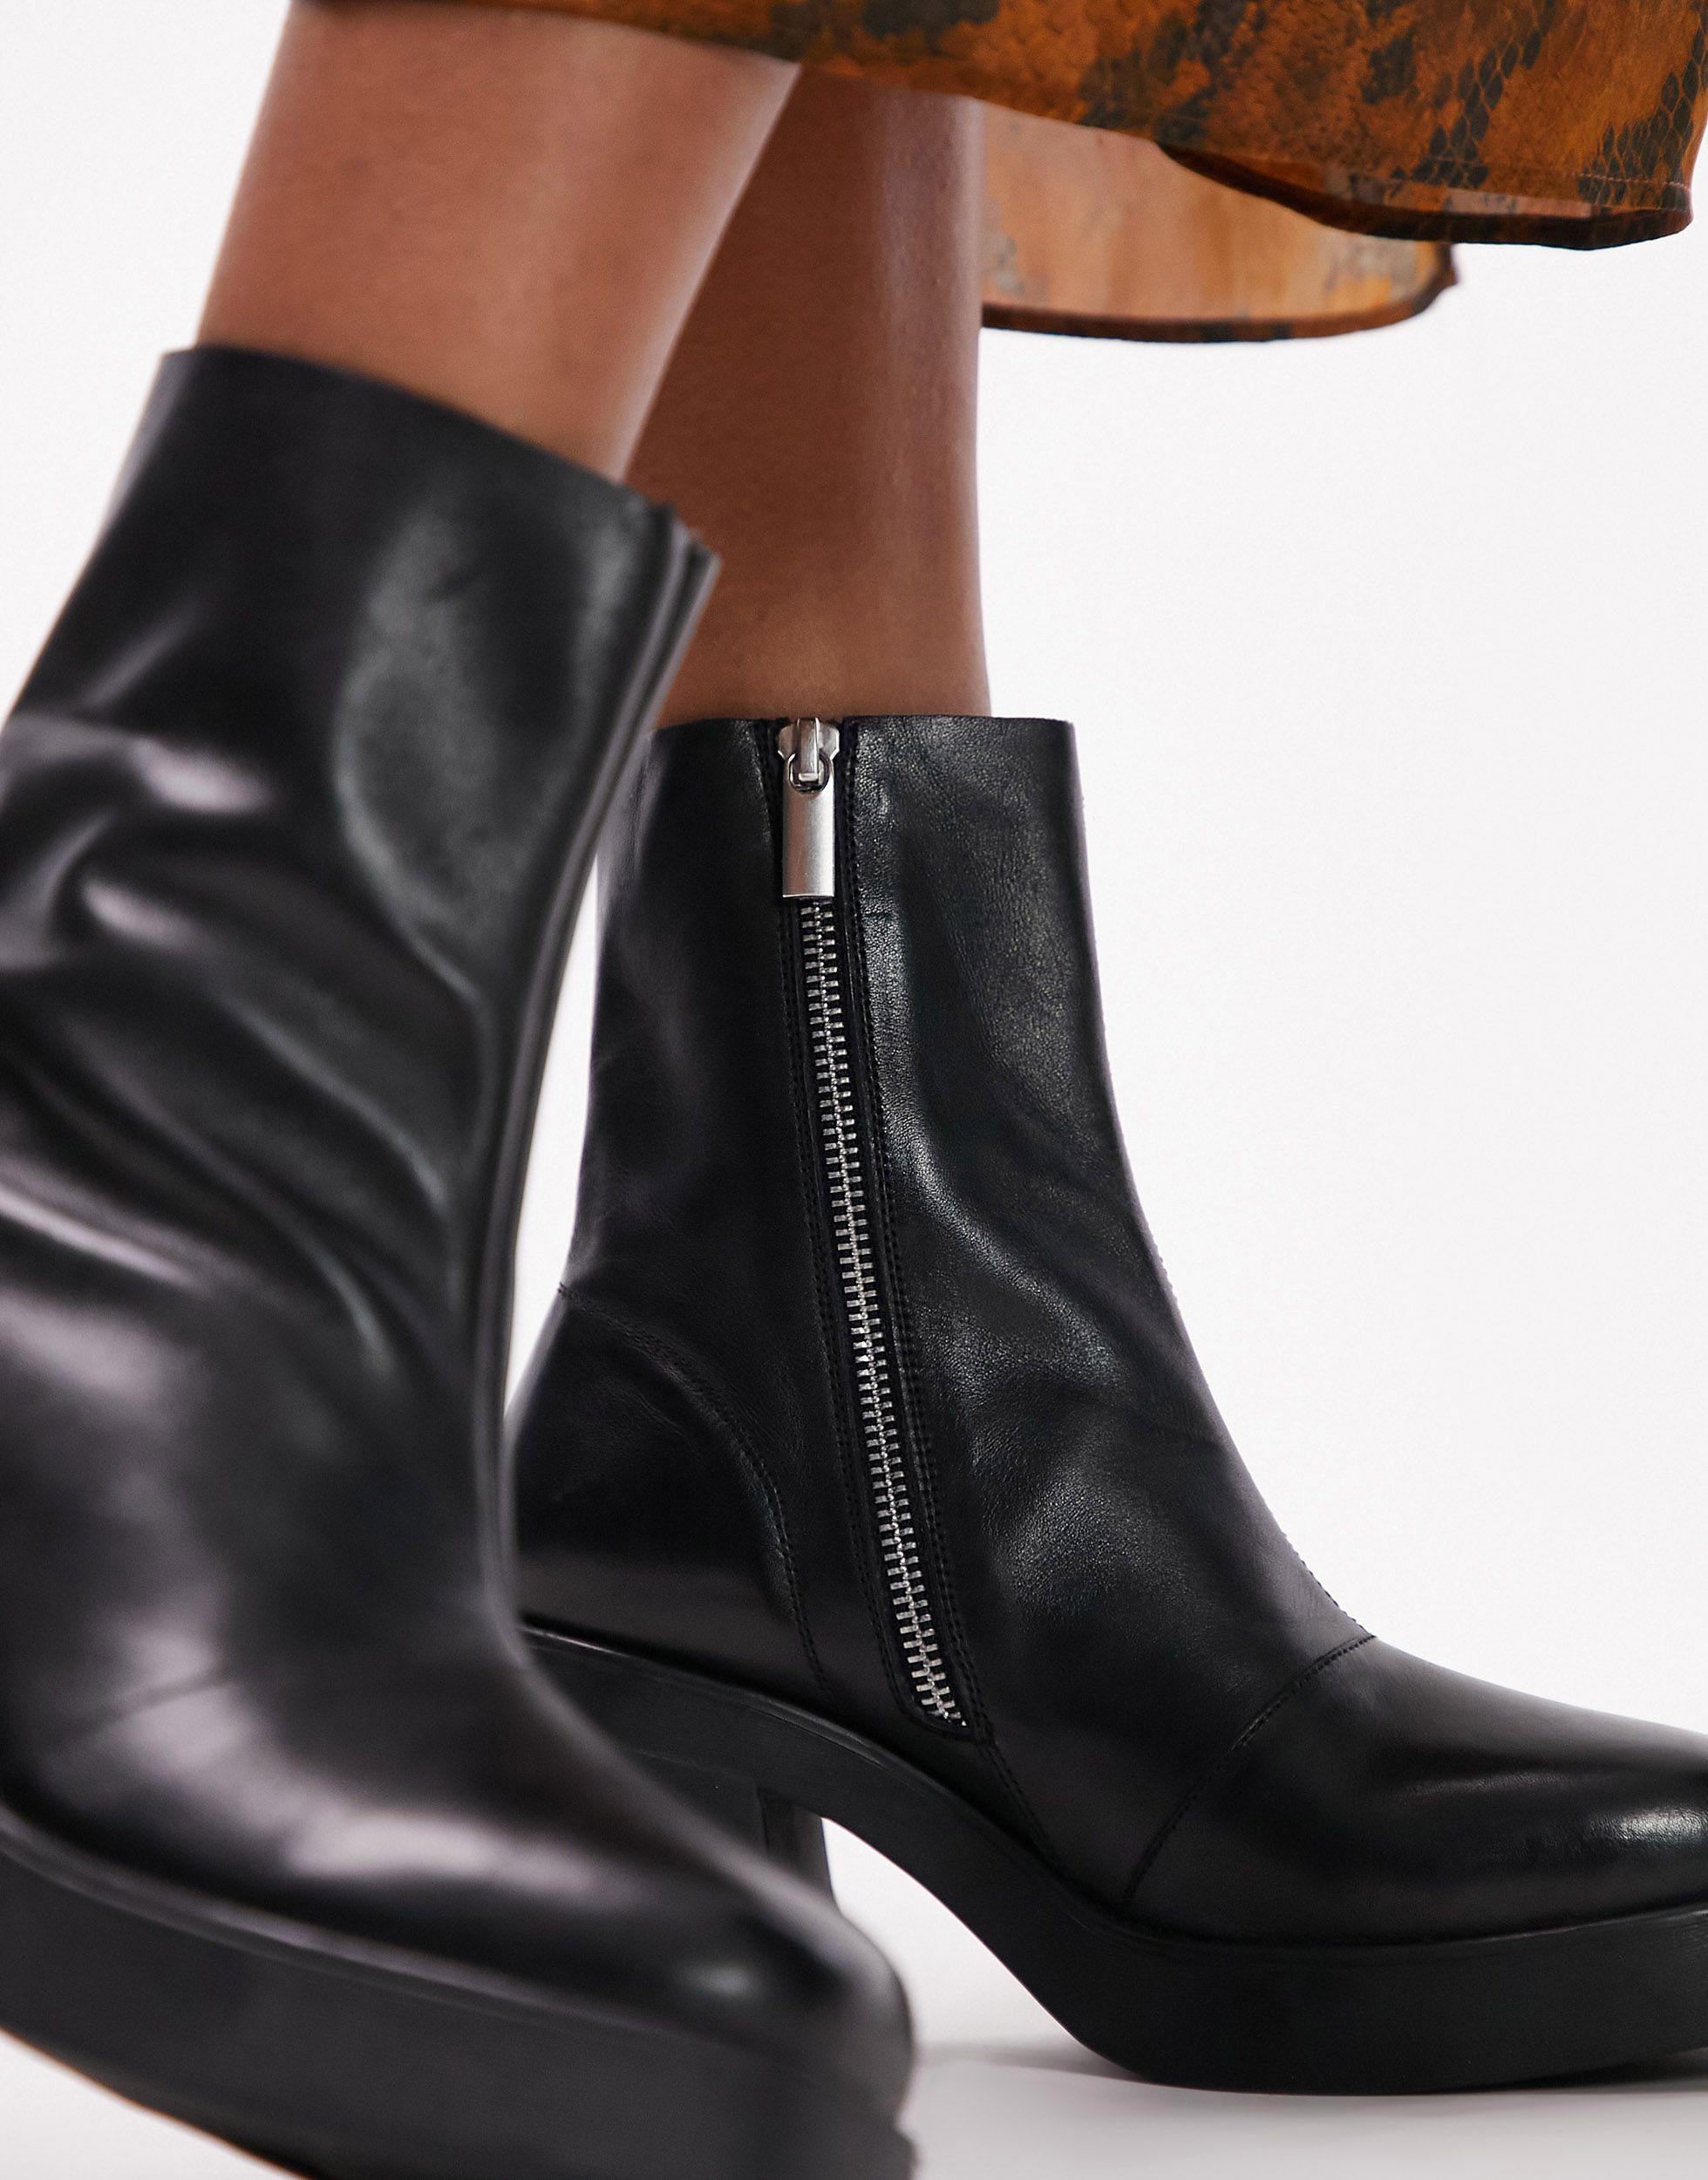 TOPSHOP Tyra Leather Block Heeled Boot in Brown | Lyst